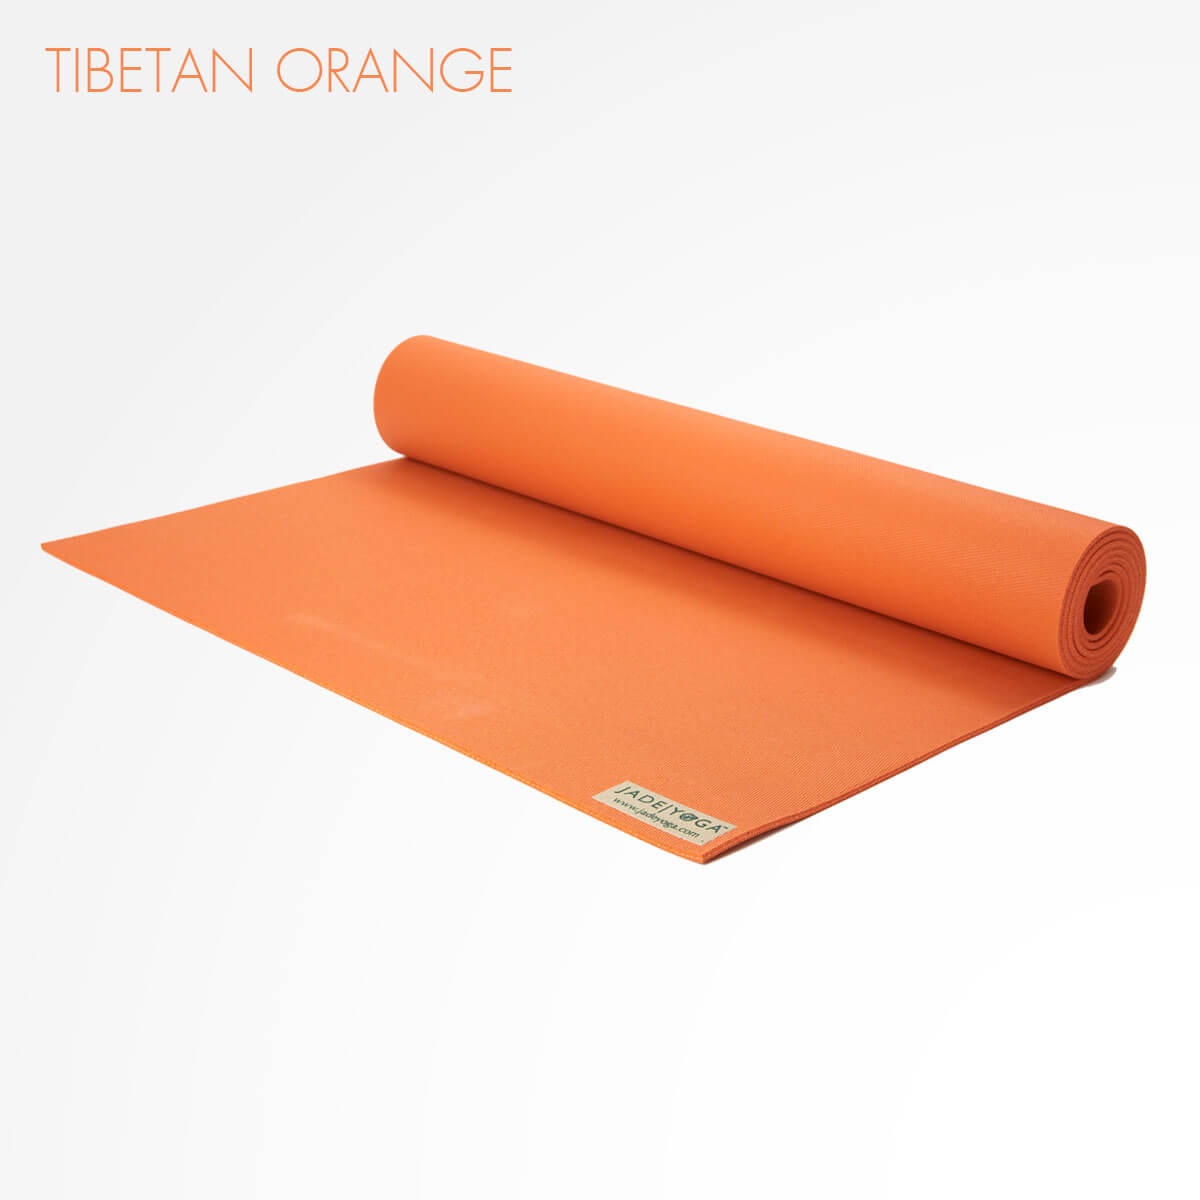 Elite S Yoga Mat - Durable and Supportive - Eco Friendly - JadeYoga